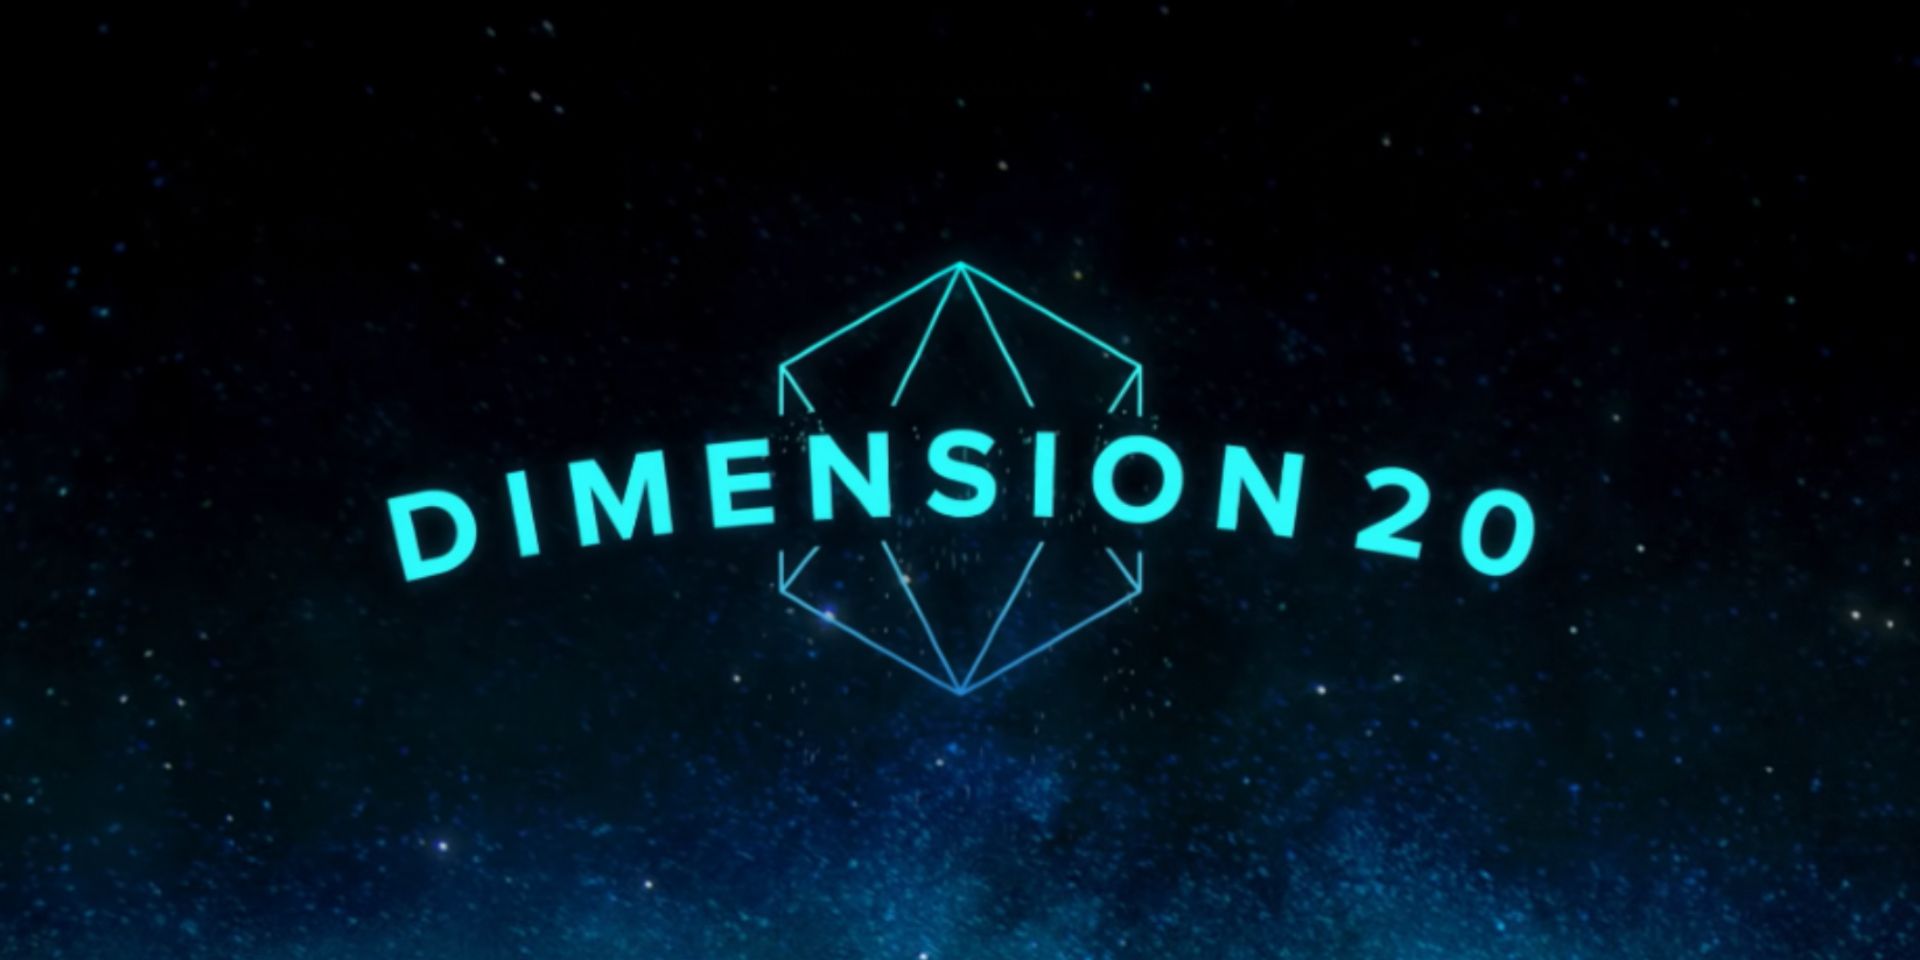 Tabletop liveplay Dimension 20 has a blue vector logo in a space background.